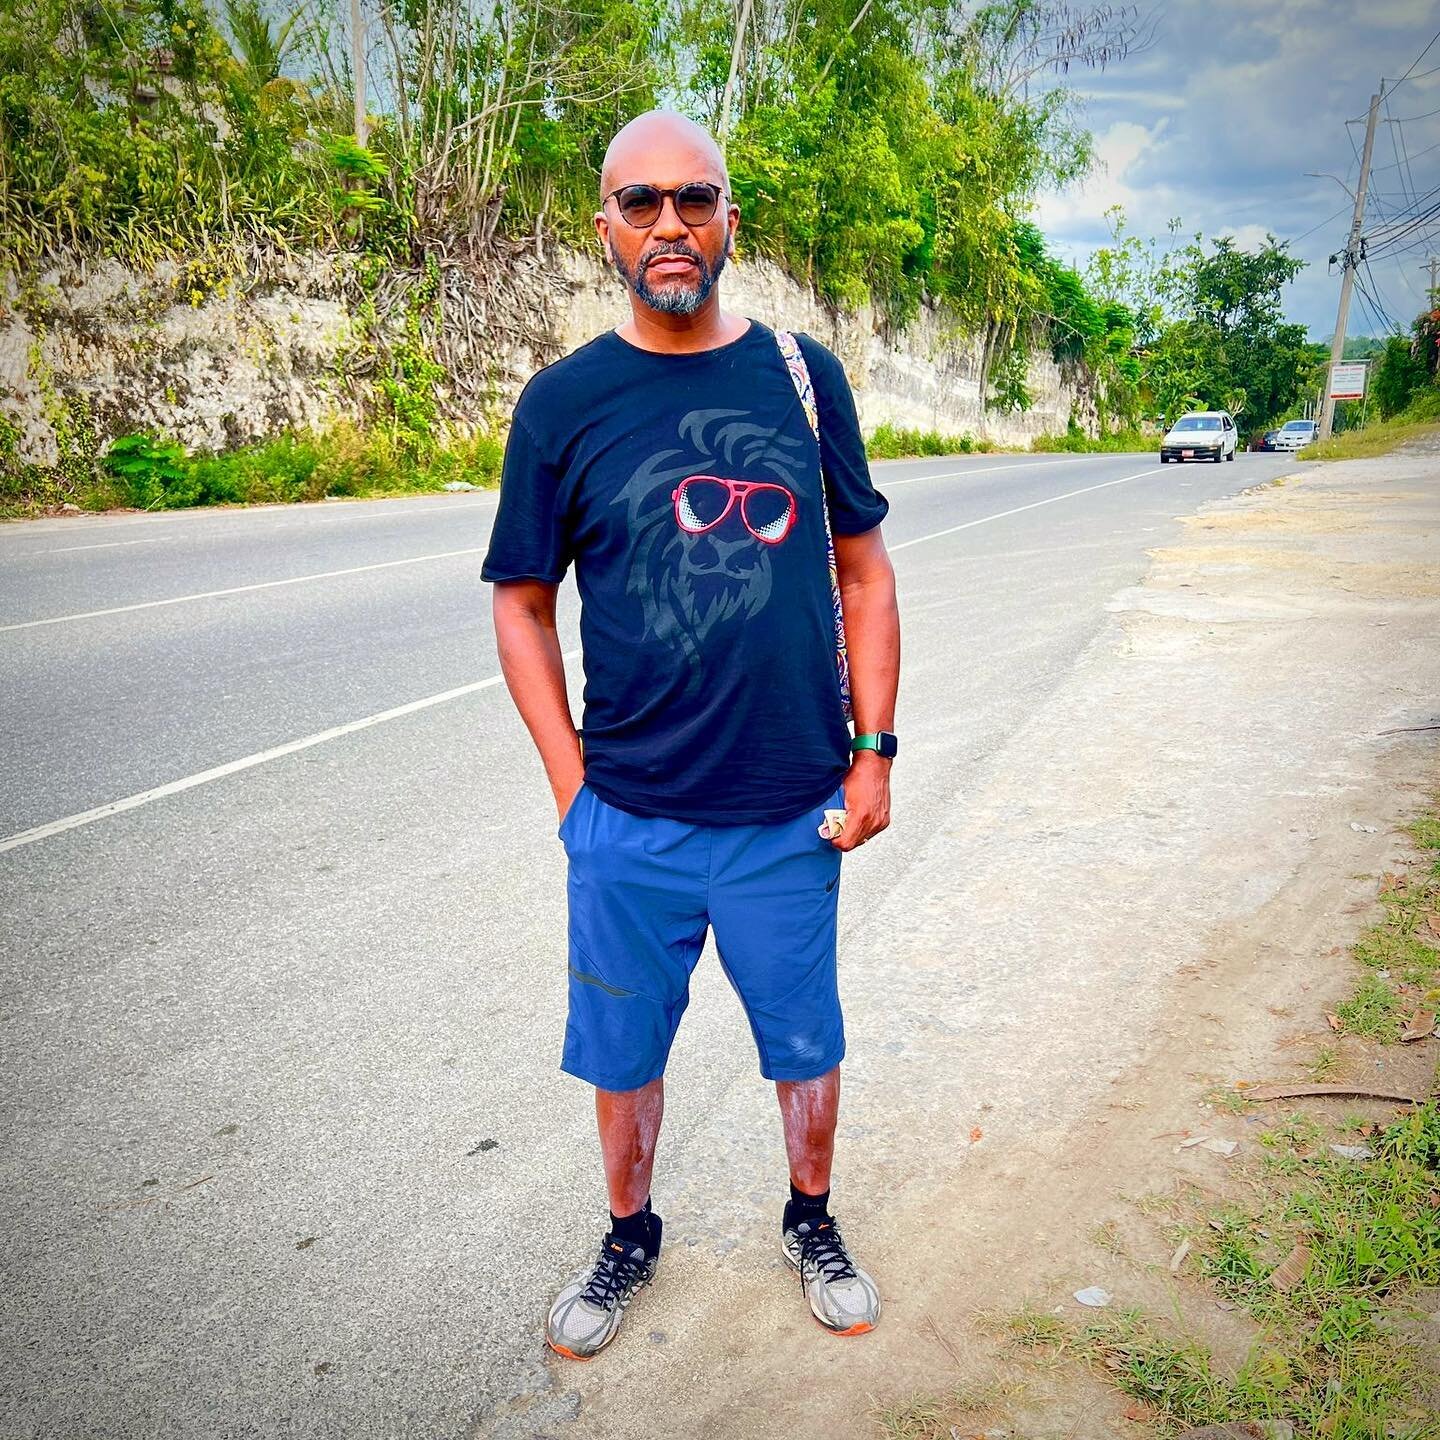 &bull;Raggamuffin in&hellip;.Jamaica&bull;

The Raggamuffin Family travelling far and wide&hellip;.. we love to see it!

&bull;Handprinted | Organic | Raggamuffin Tee&rsquo;s&bull;

Men&rsquo;s &amp; Women&rsquo;s Fit&rsquo;s &bull; In Stock &amp; Av